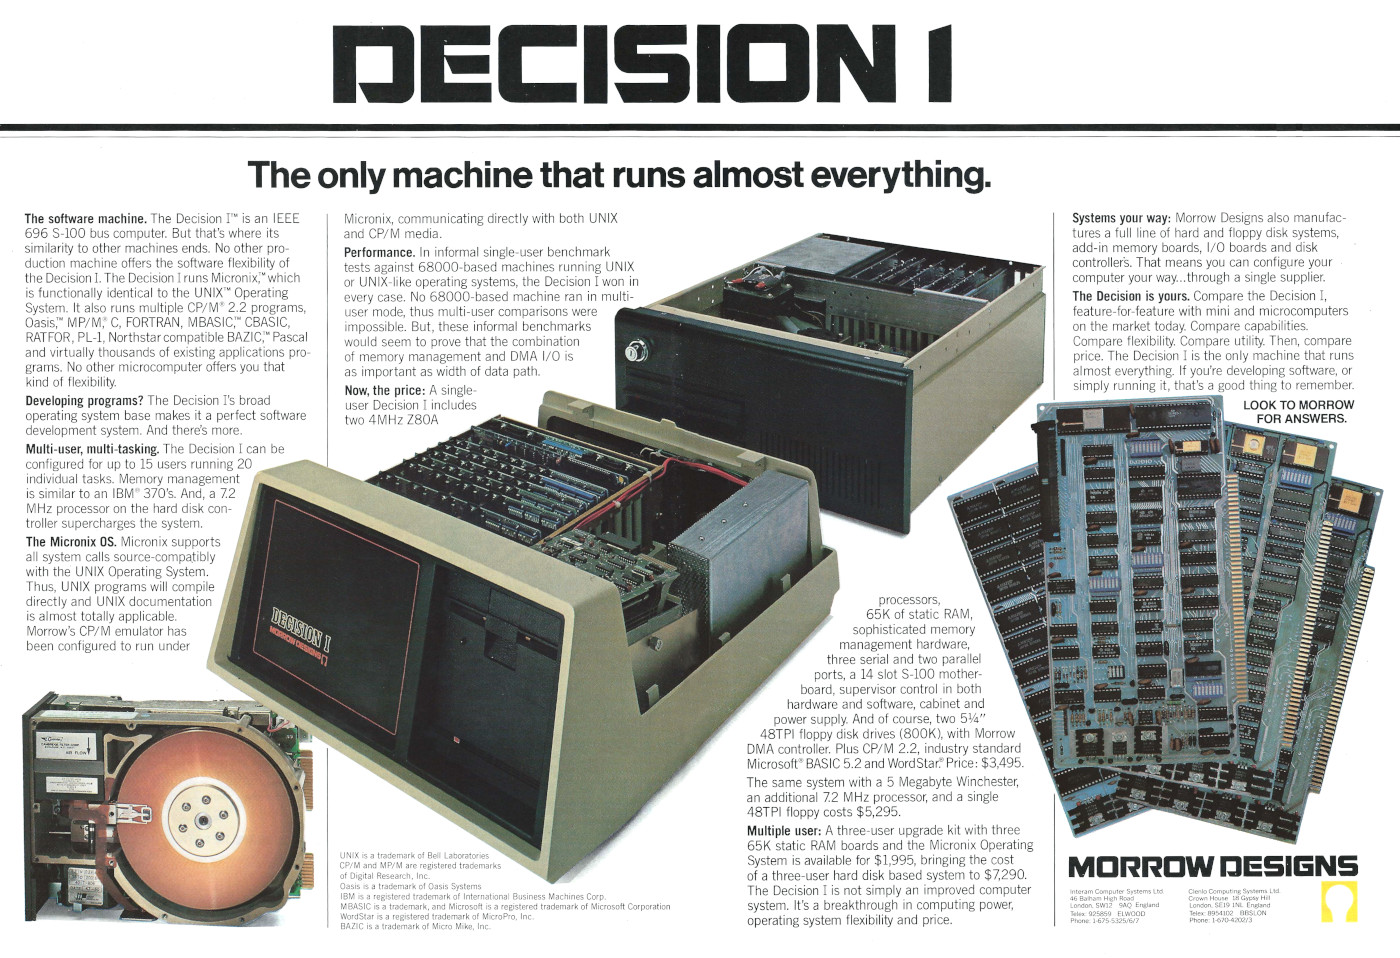 nosher.net - Morrow advert: Decision 1 - the only machine that